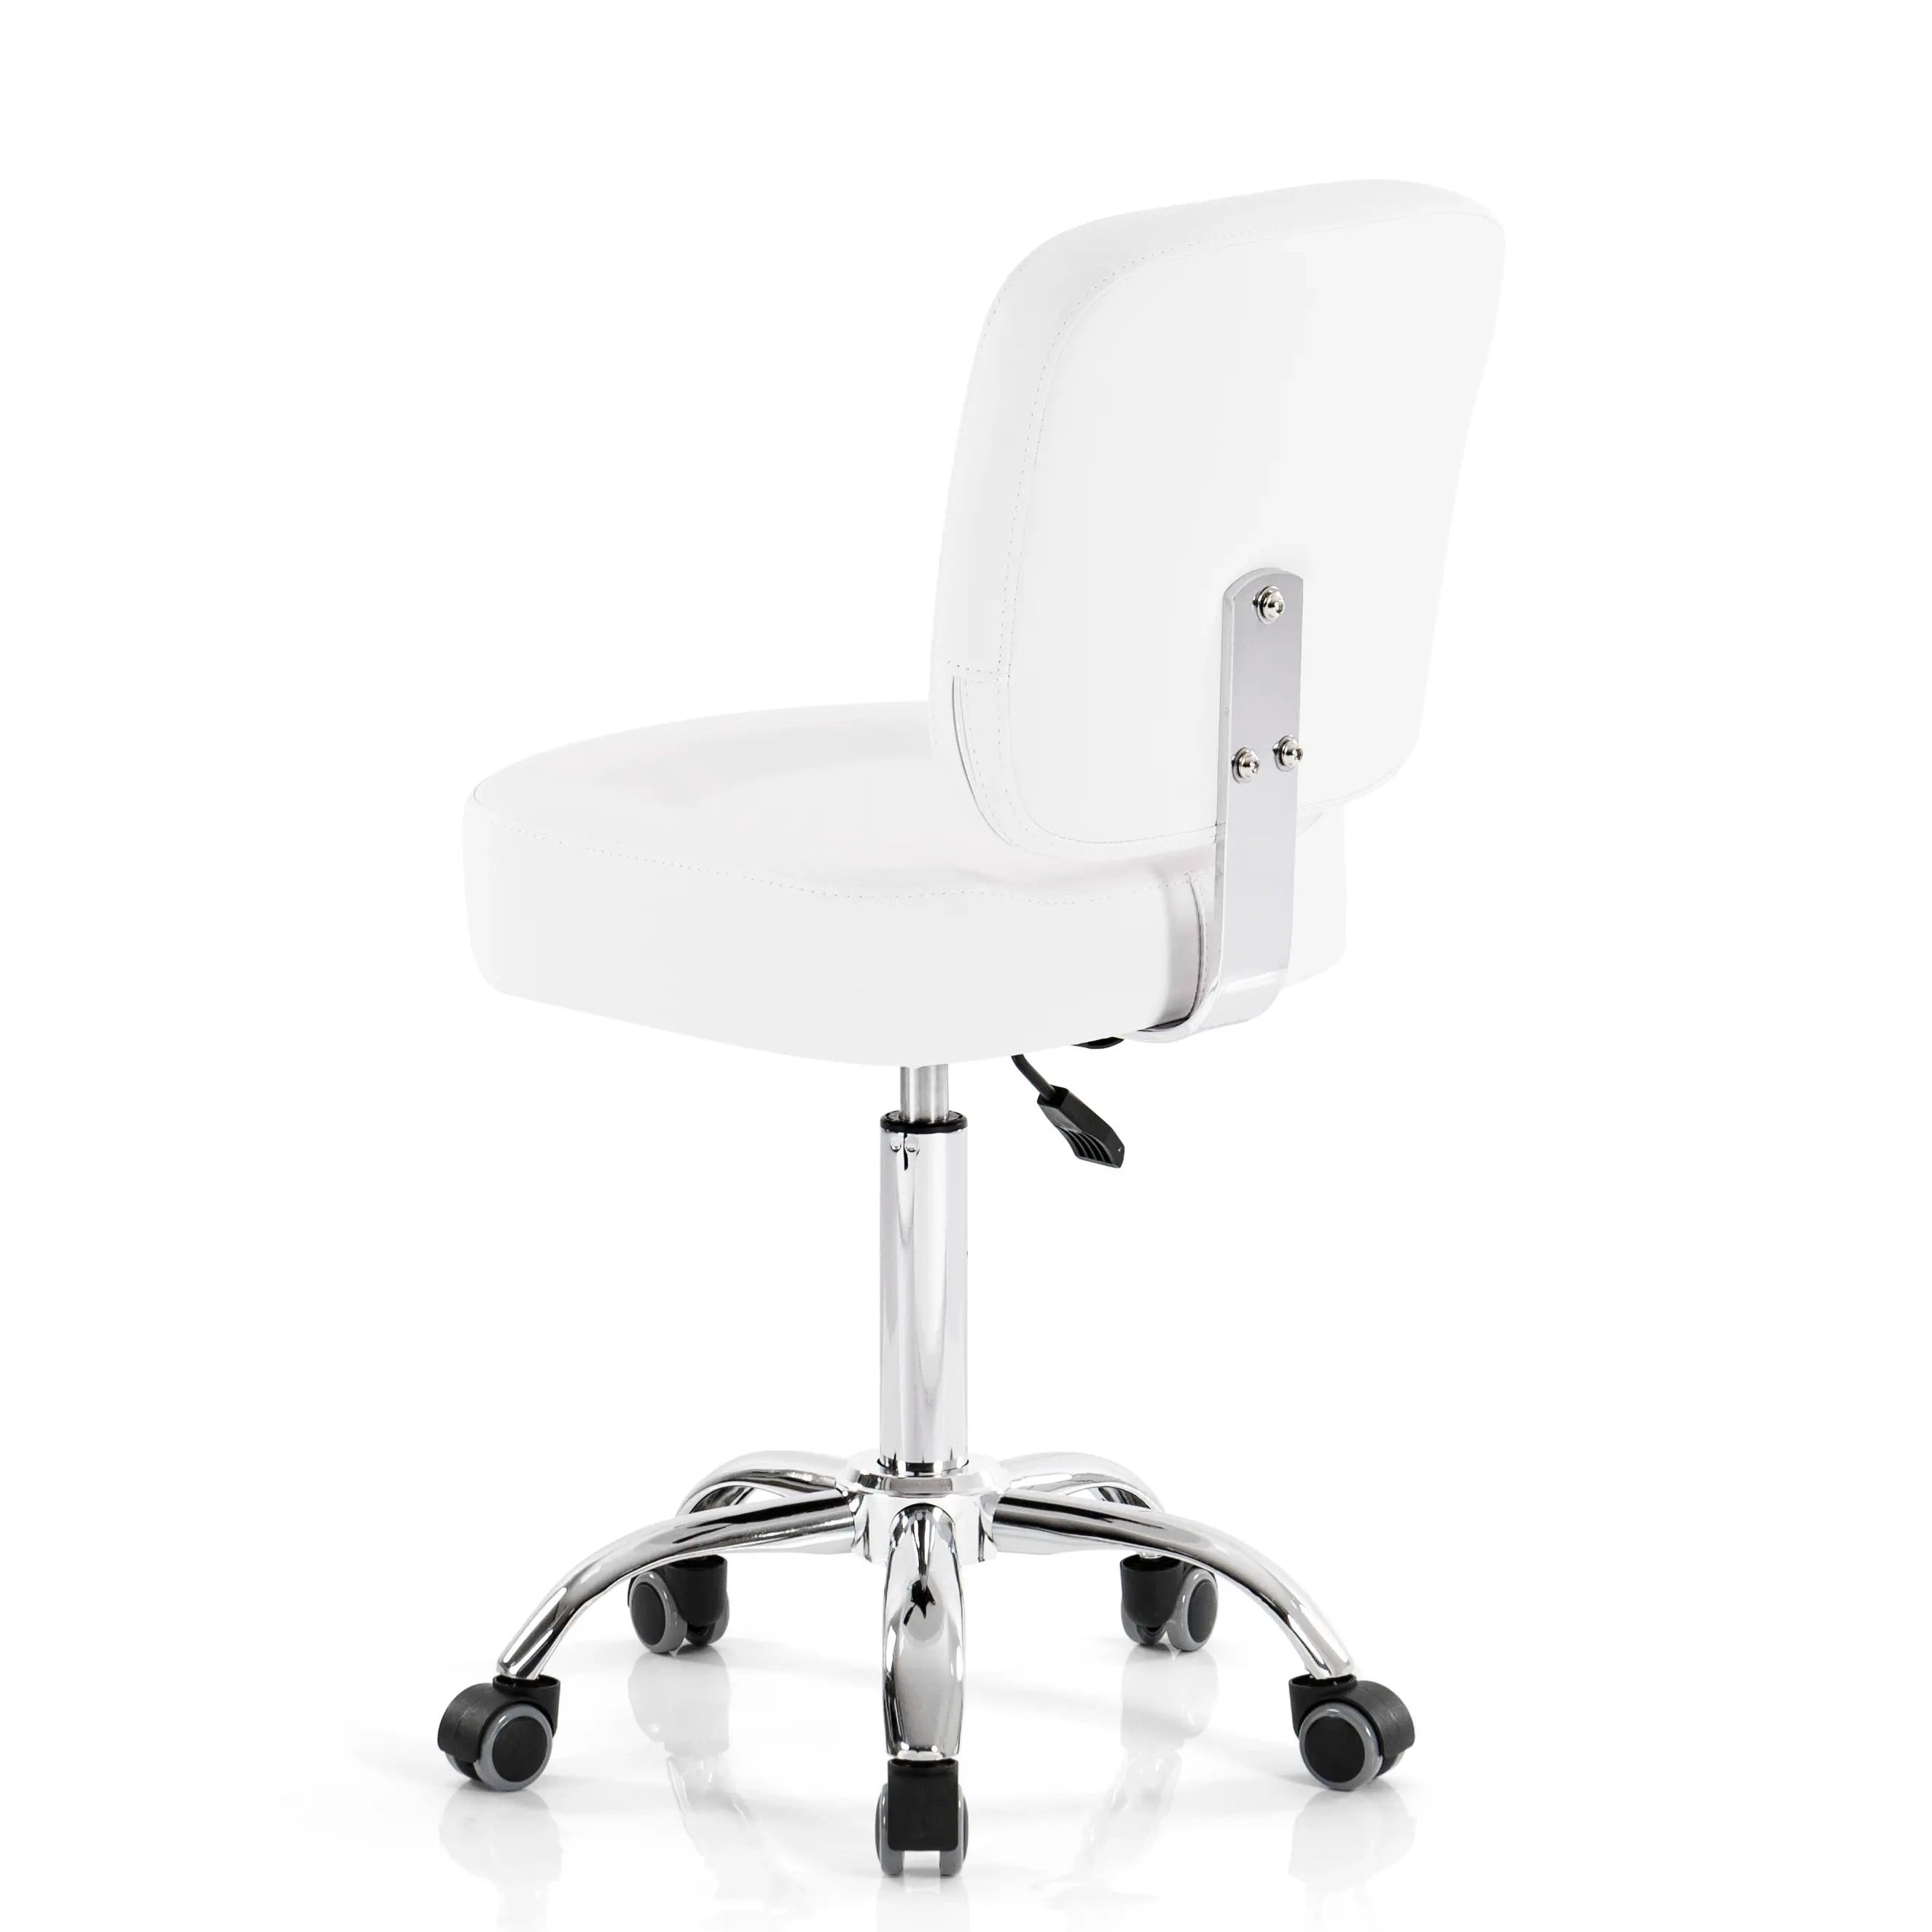 Ola Esthetician Chair Swiveling With Backrest white color